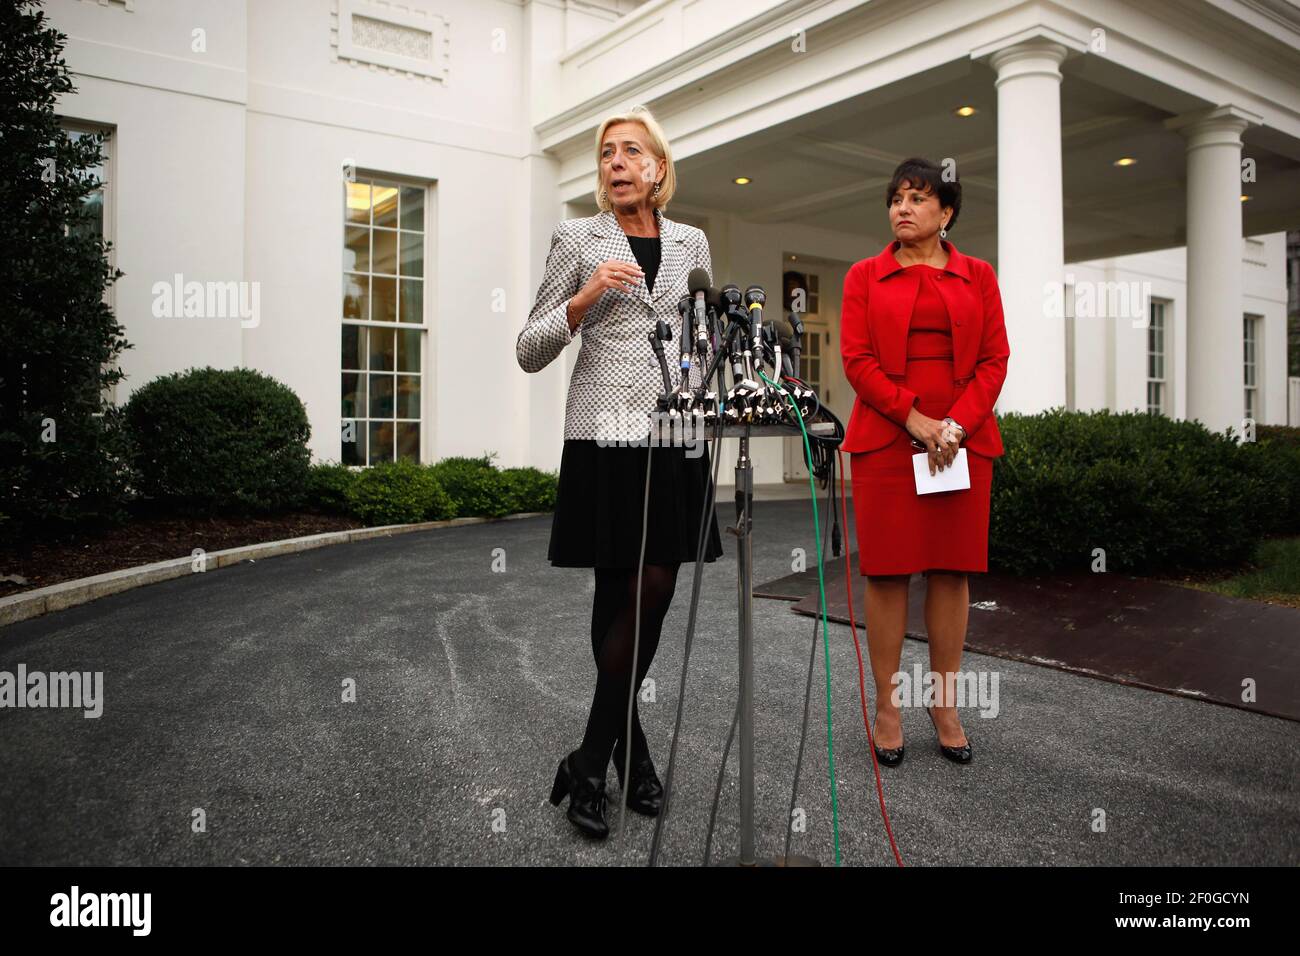 4 October 2010 - Washington, DC - Former Change to Win Chair Anna Burger (L) and Pritzker Realty Group Chairman Penny Pritzker talk to the news media after a meeting of the PresidentÃ†s Economic Recovery Advisory Board (PERAB) at the White House October 4, 2010 in Washington, DC. President Barack Obama used the meeting to announce the 'Skills for America's Future,' a program focused on improving partnerships between industry and community colleges with the goals of workforce development strategies, job training programs and job placement. Photo Credit: Chip Somodevilla/Pool/Sipa Press/obama pe Stock Photo